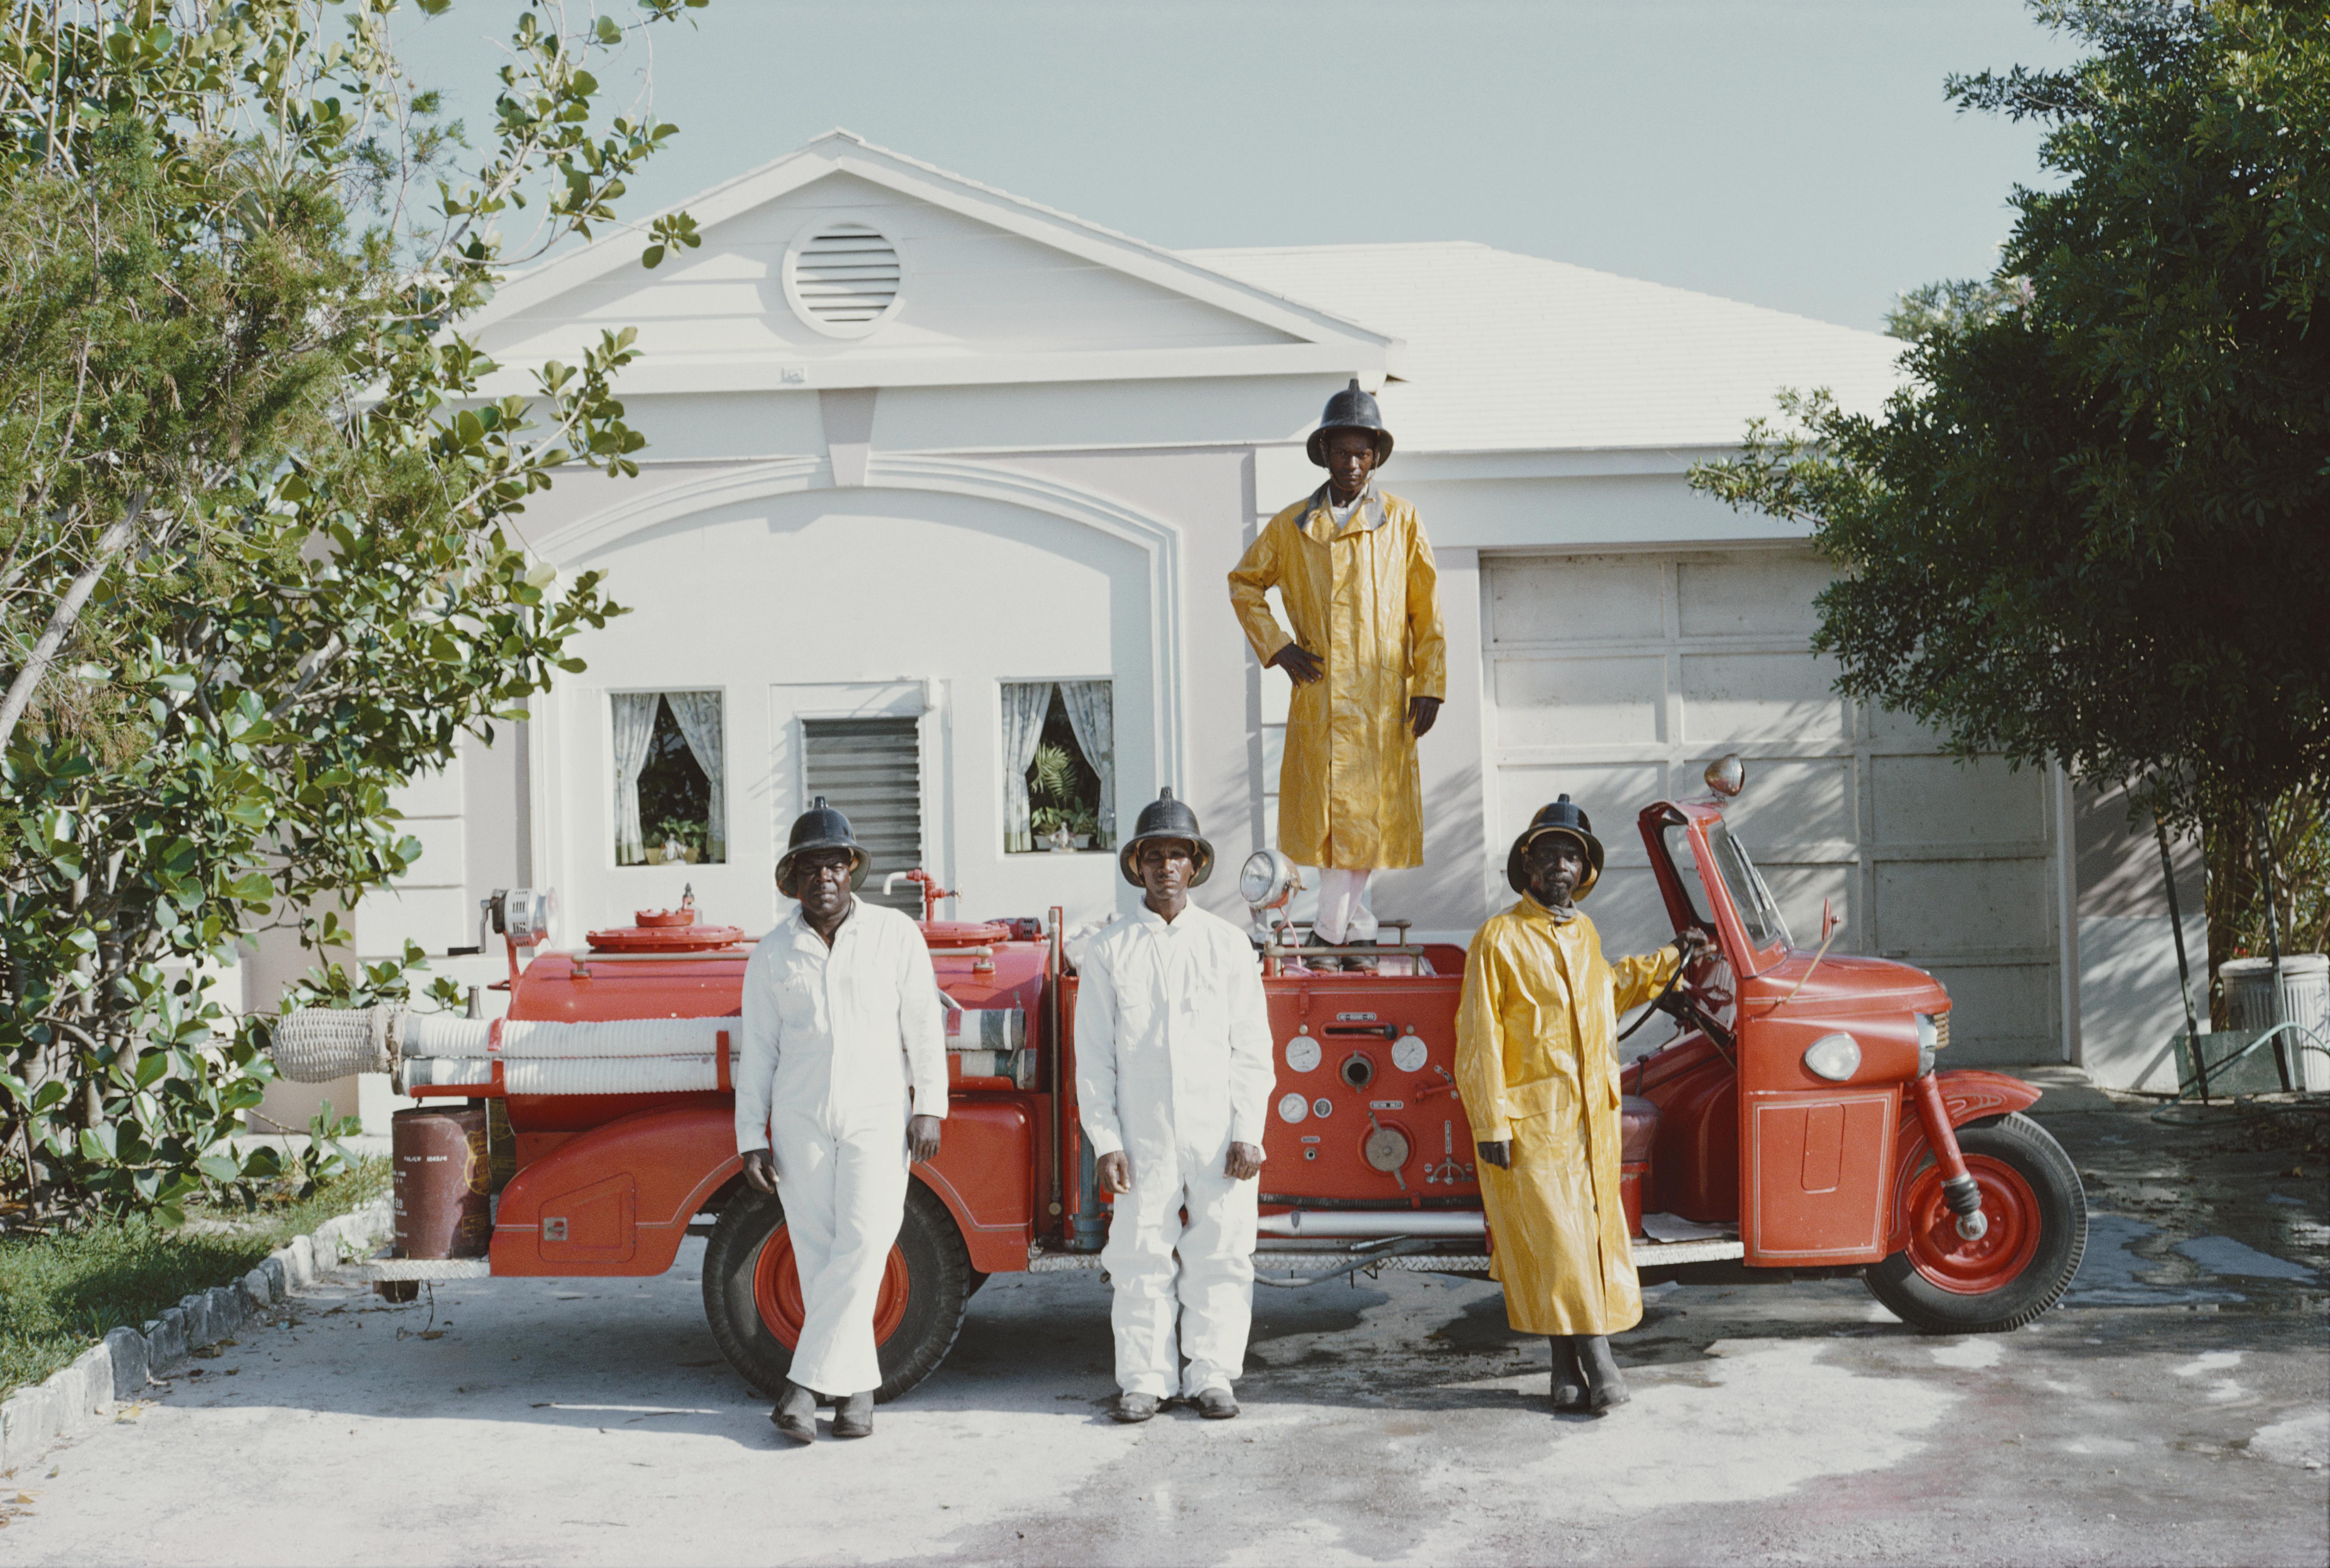 'Lyford Cay Fire Service' 1966 Slim Aarons Limited Estate Edition Print 
The fire service in Lyford Cay, on New Providence Island in the Bahamas, April 1966. 

Slim Aarons Chromogenic C print 
Printed Later 
Slim Aarons Estate Edition 
Produced